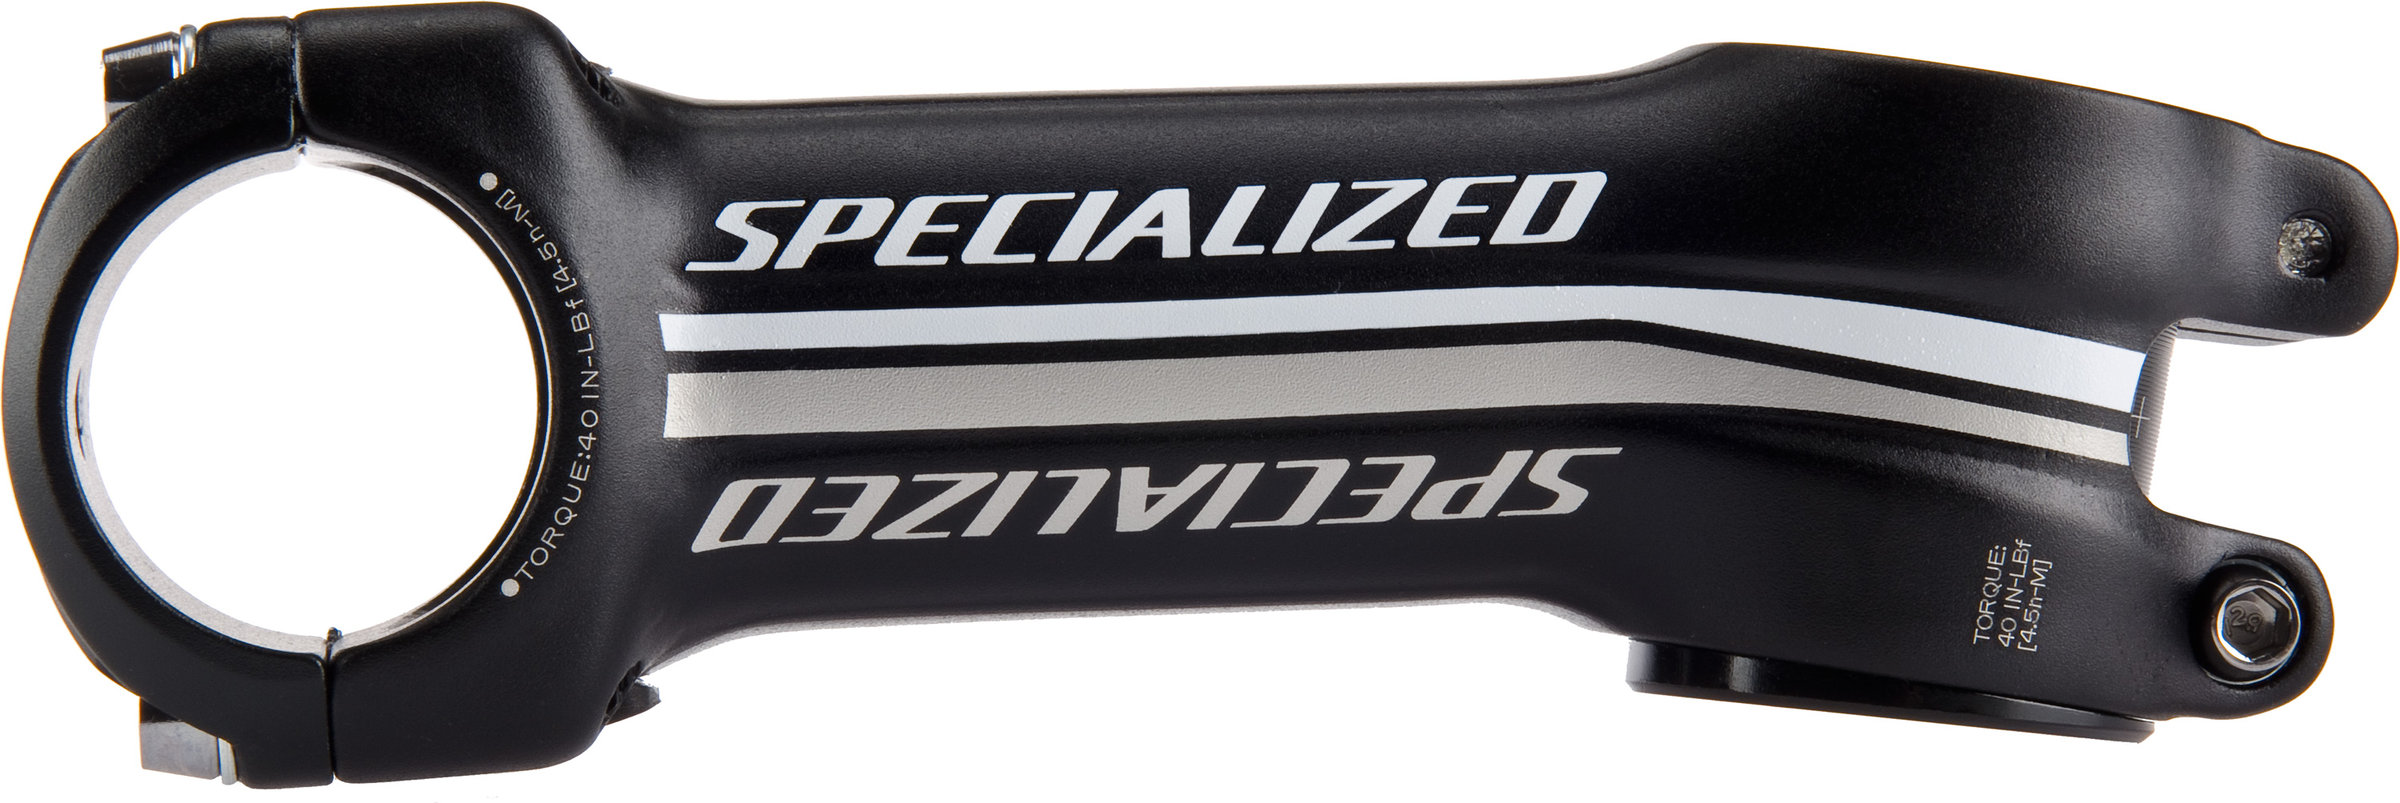 SPECIALIZED ステム COMP 12° mulch stem 90mm